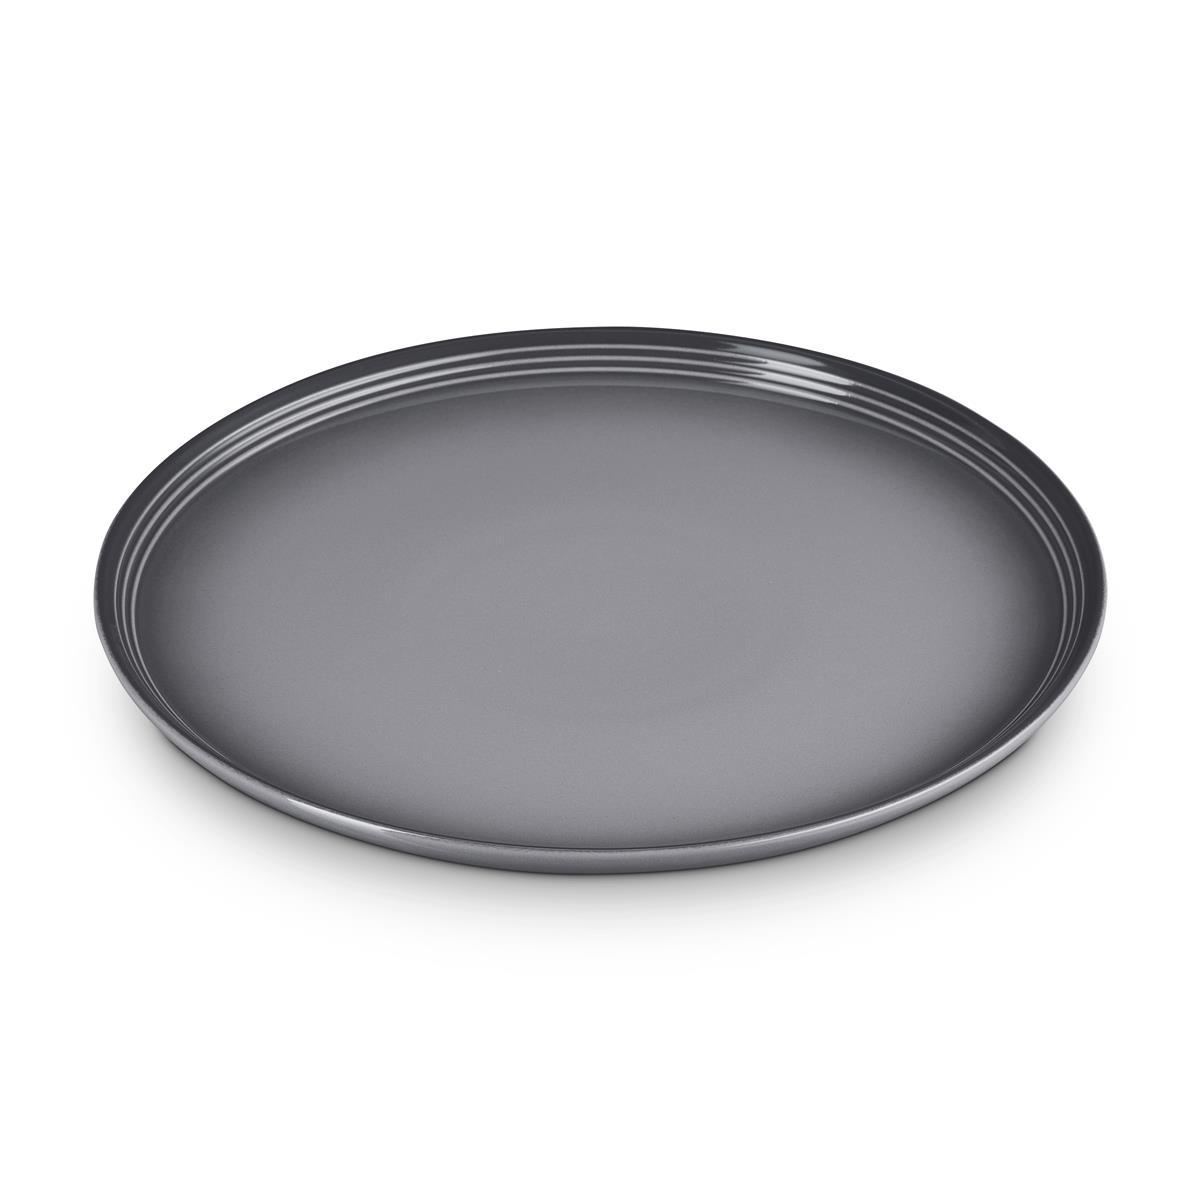 Where are the Le Creuset Dinner Plates manufactured?